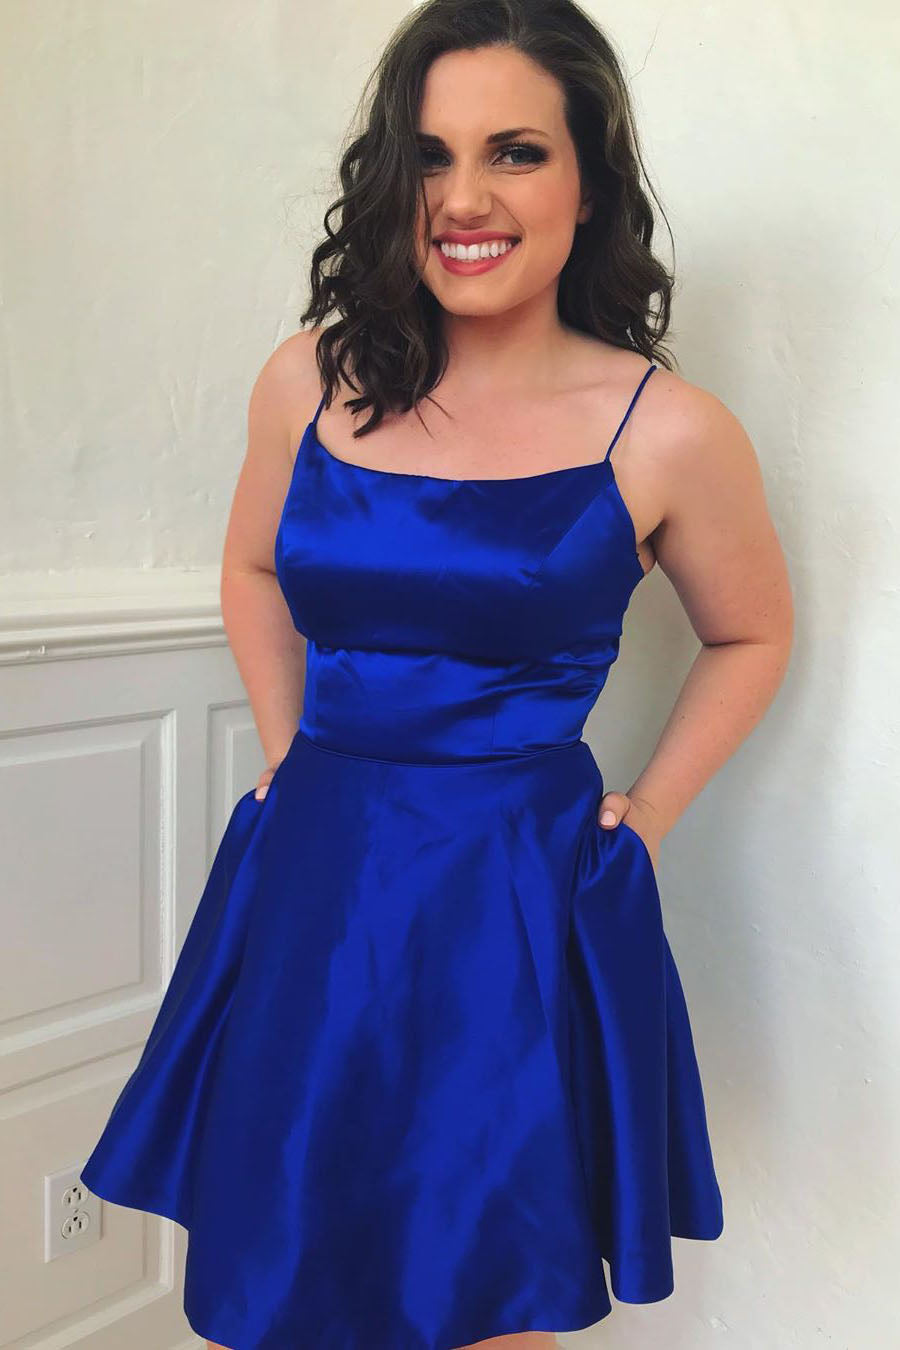 Royal Blue Homecoming Dress, Short Prom Dress ,Formal Dress, Pageant Dance Dresses, Back To School Party Gown, PC0840